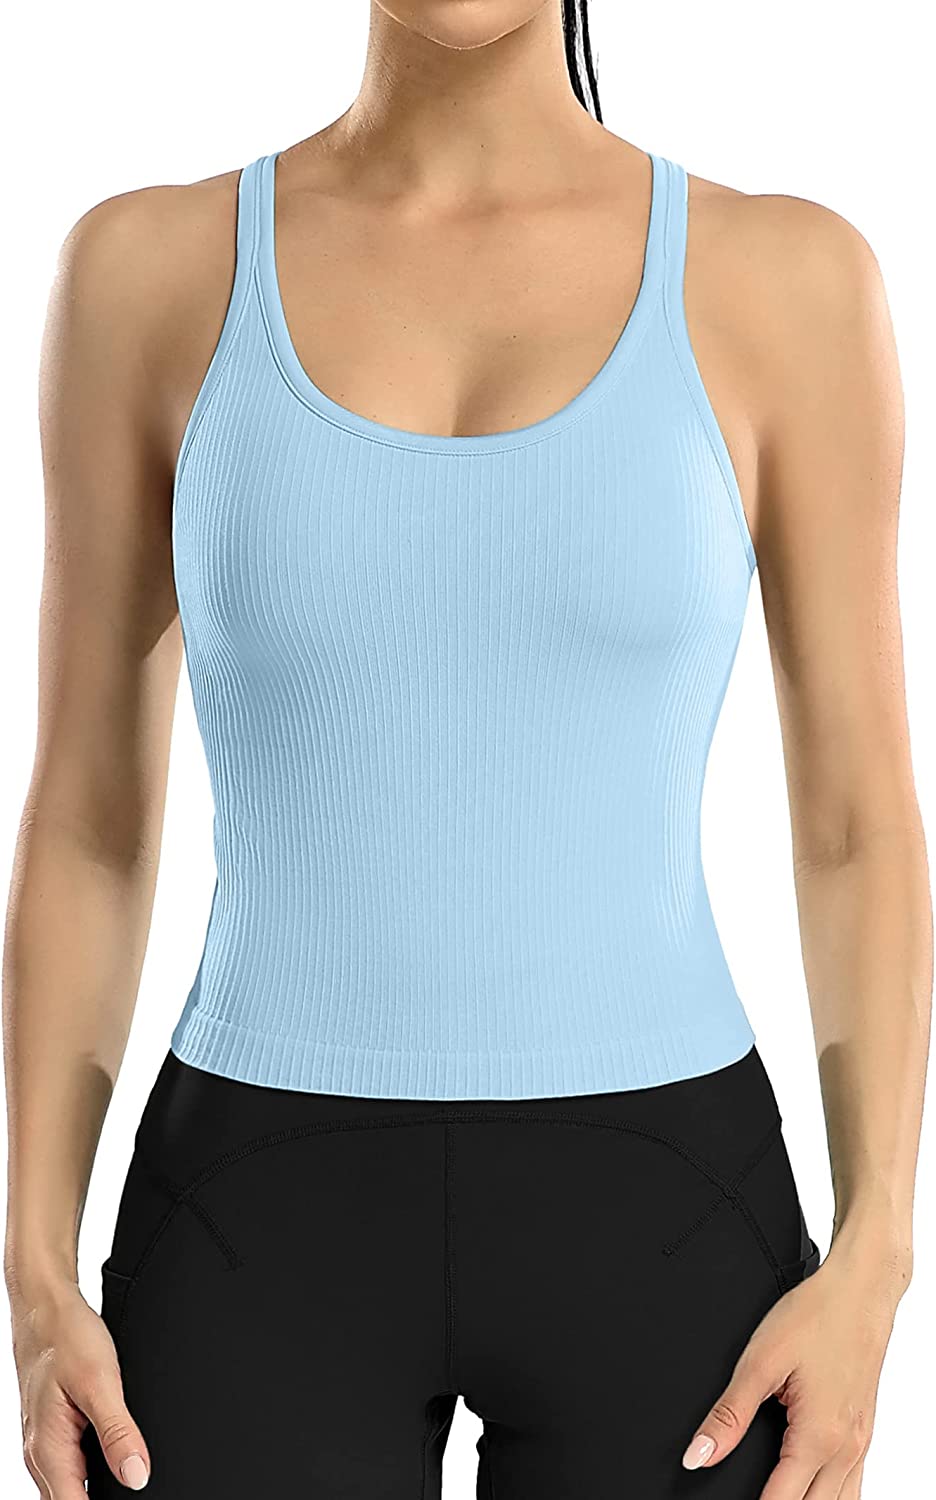  ATTRACO Womens Ribbed Workout Tank Tops Tight Fitted